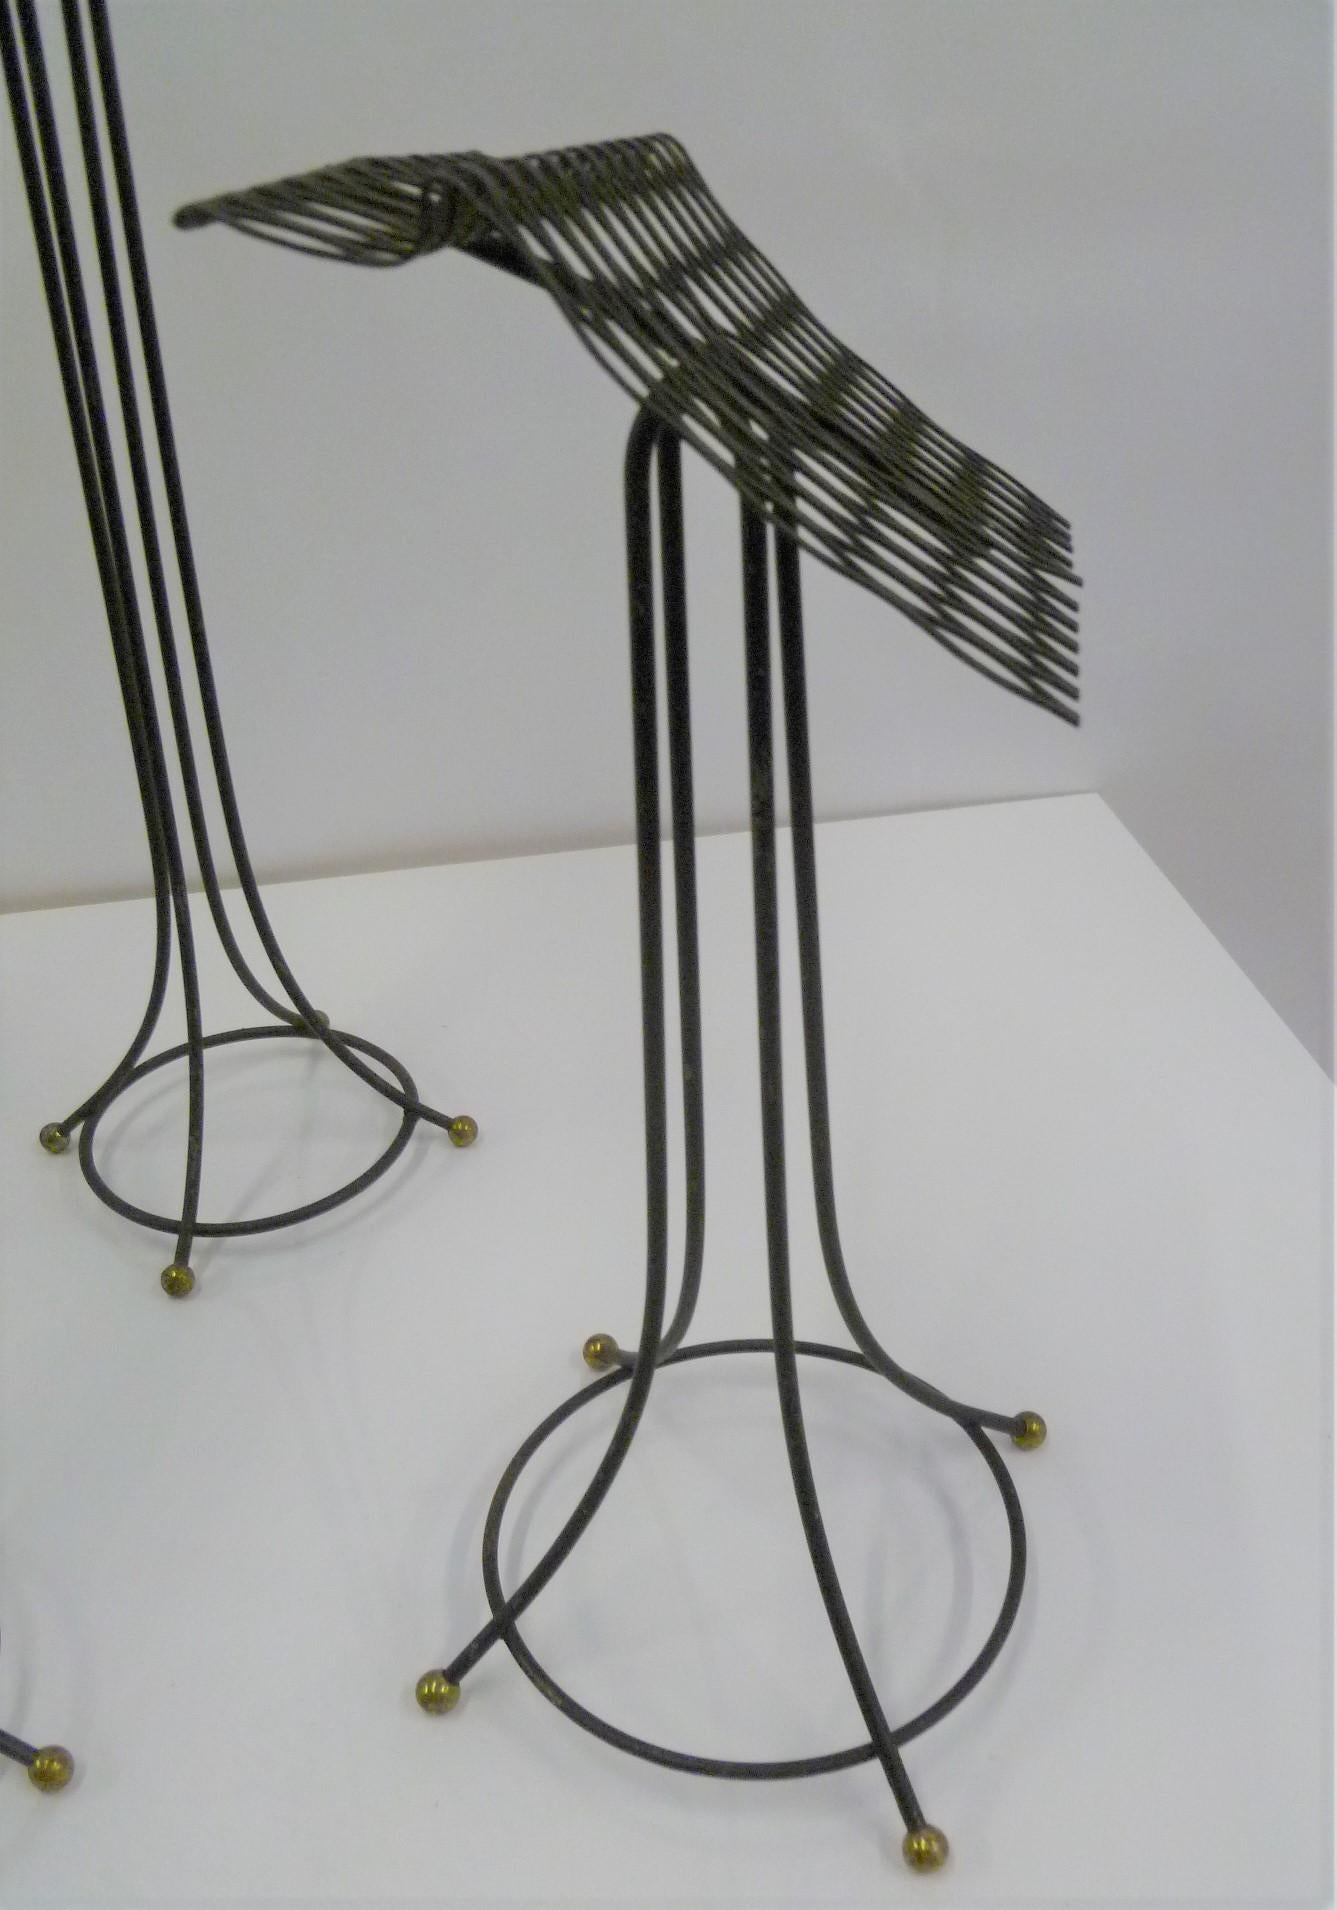 American Sculptural Group of 7 Modern Black Wire Store Display Stands, 1930s-1940s